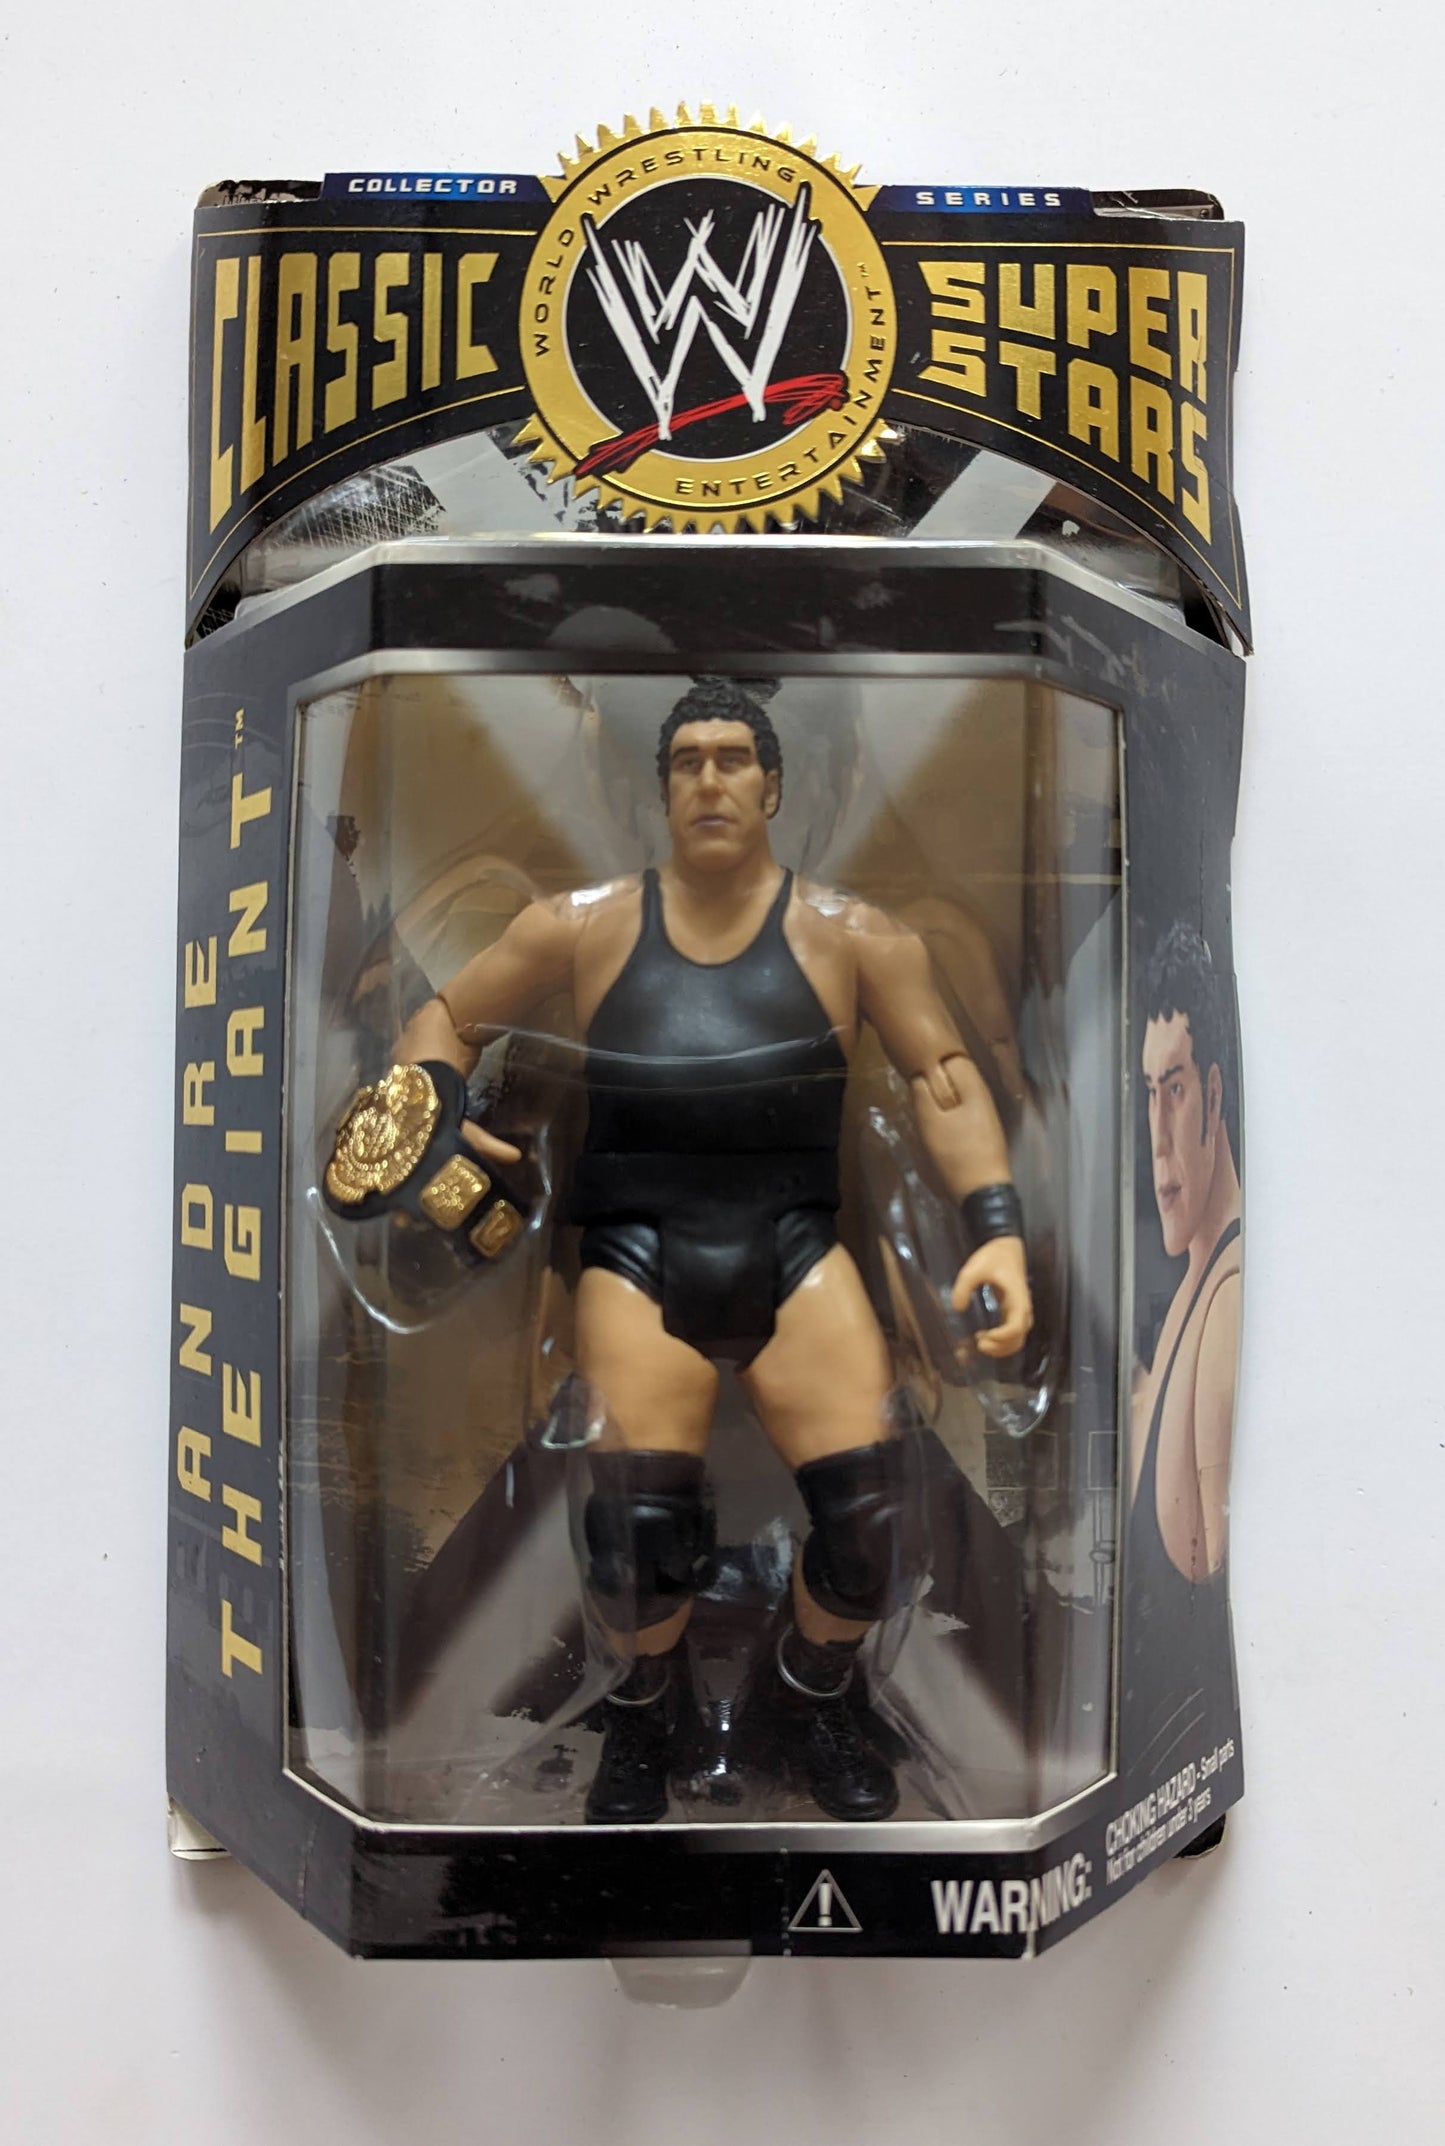 2004 WWE Jakks Pacific Classic Superstars Series 1 Andre the Giant